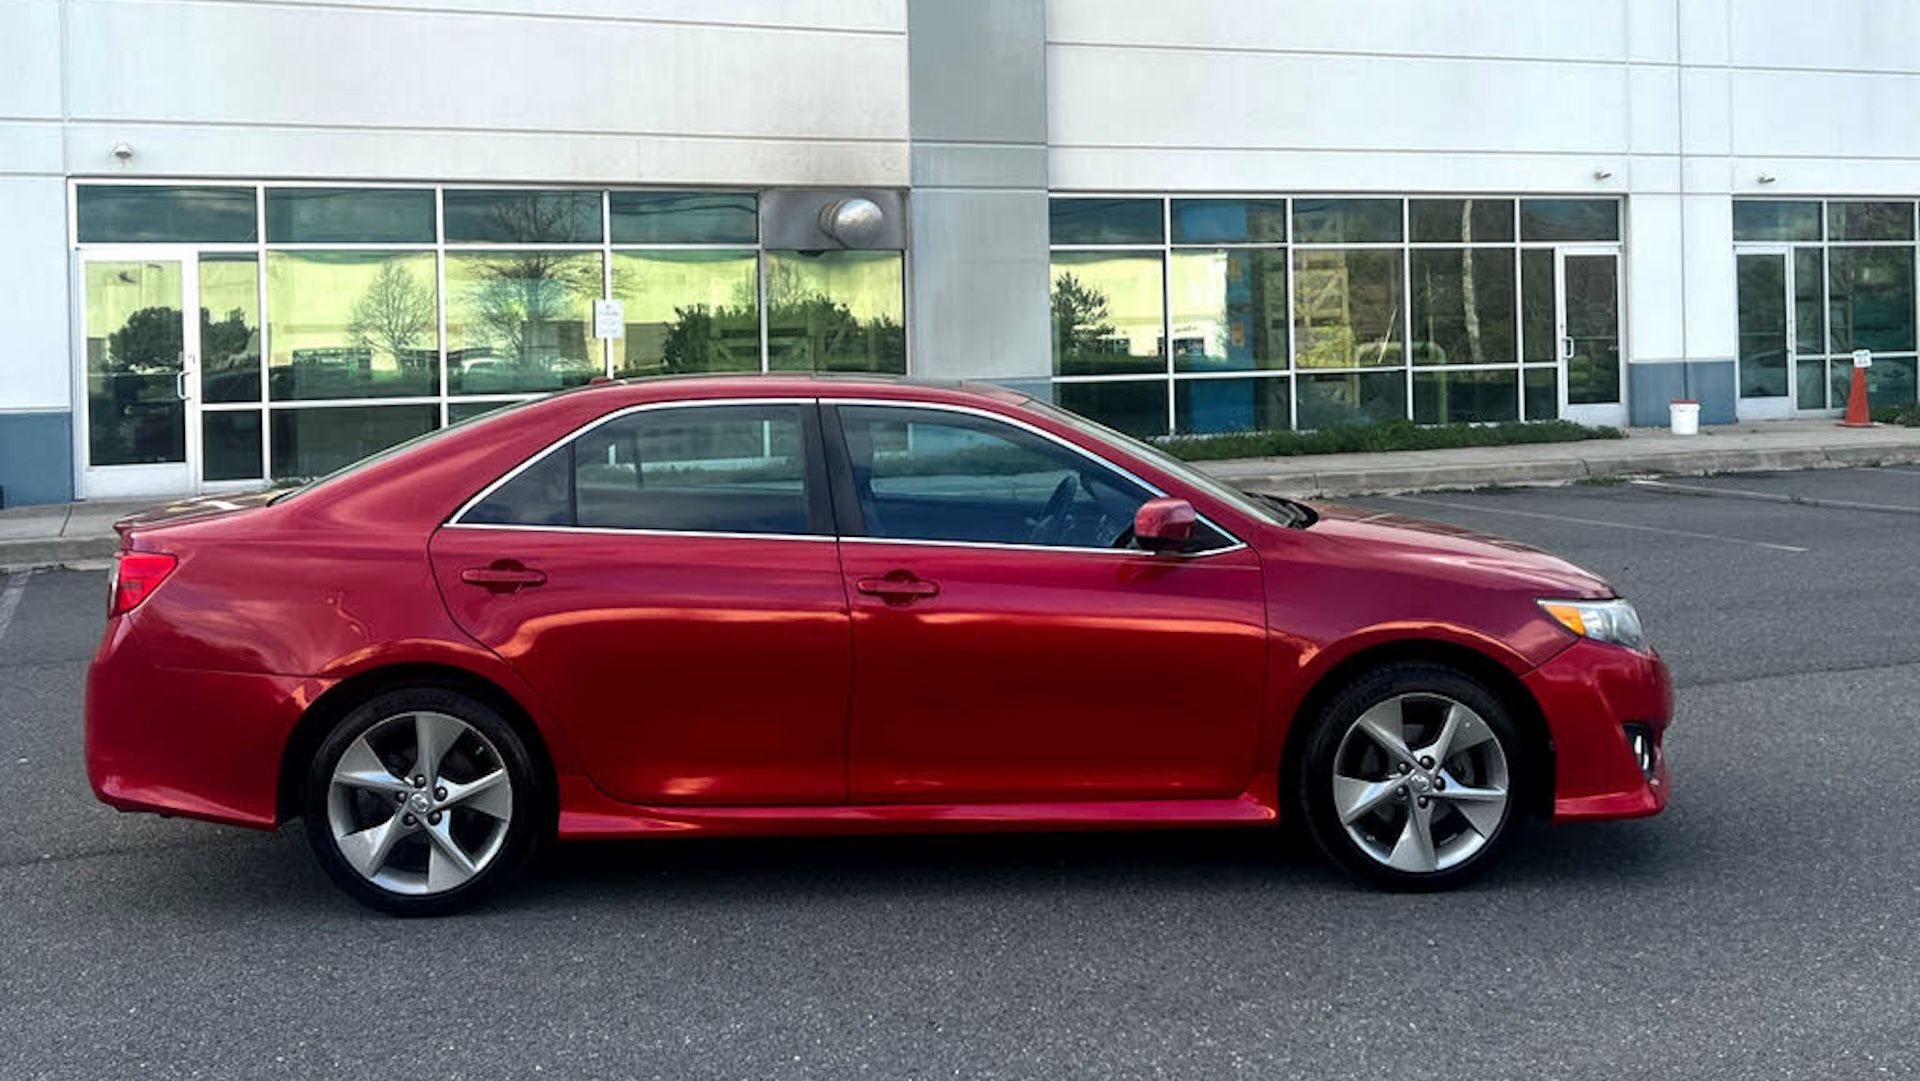 2012 Toyota Camry in red